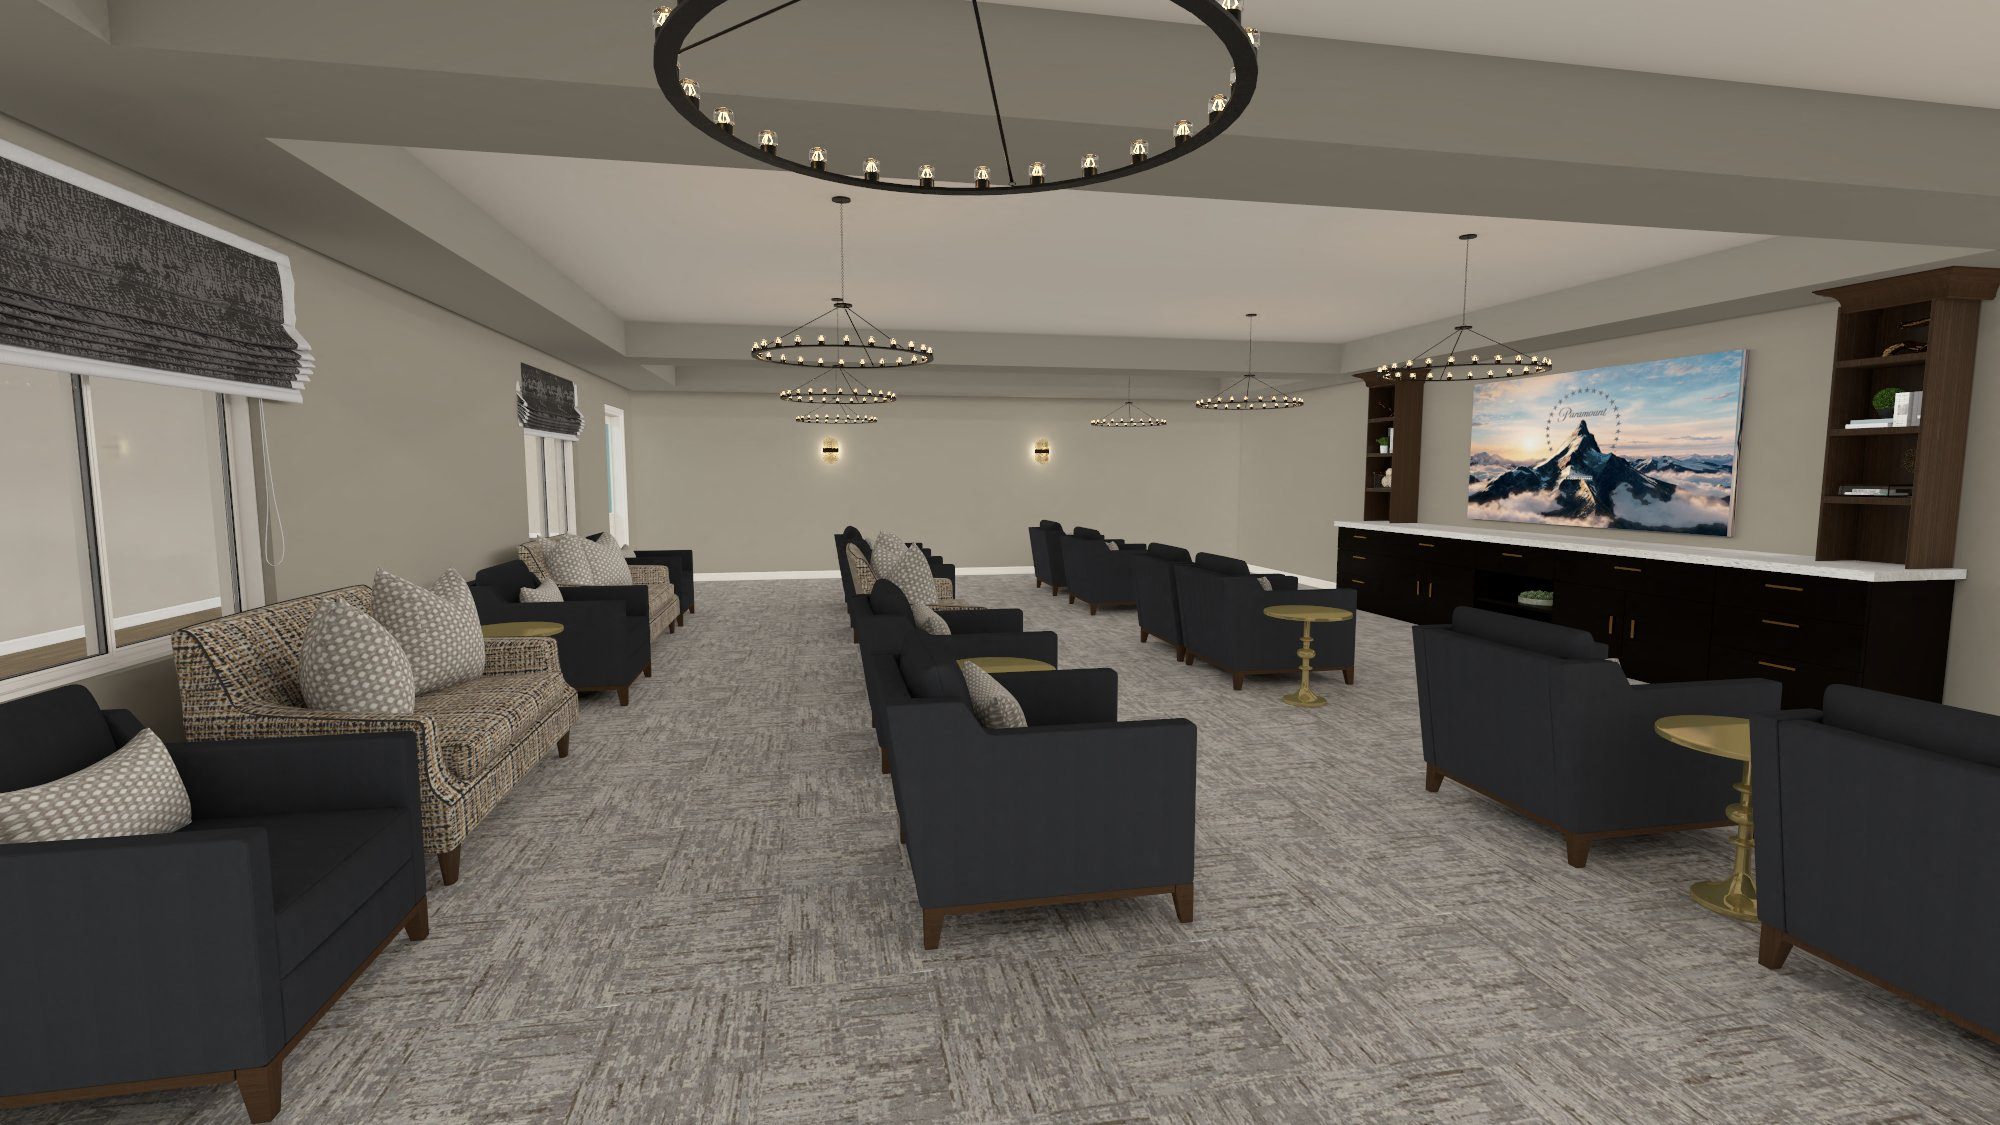 A rendering of the interior at the Avalon - chairs and Television